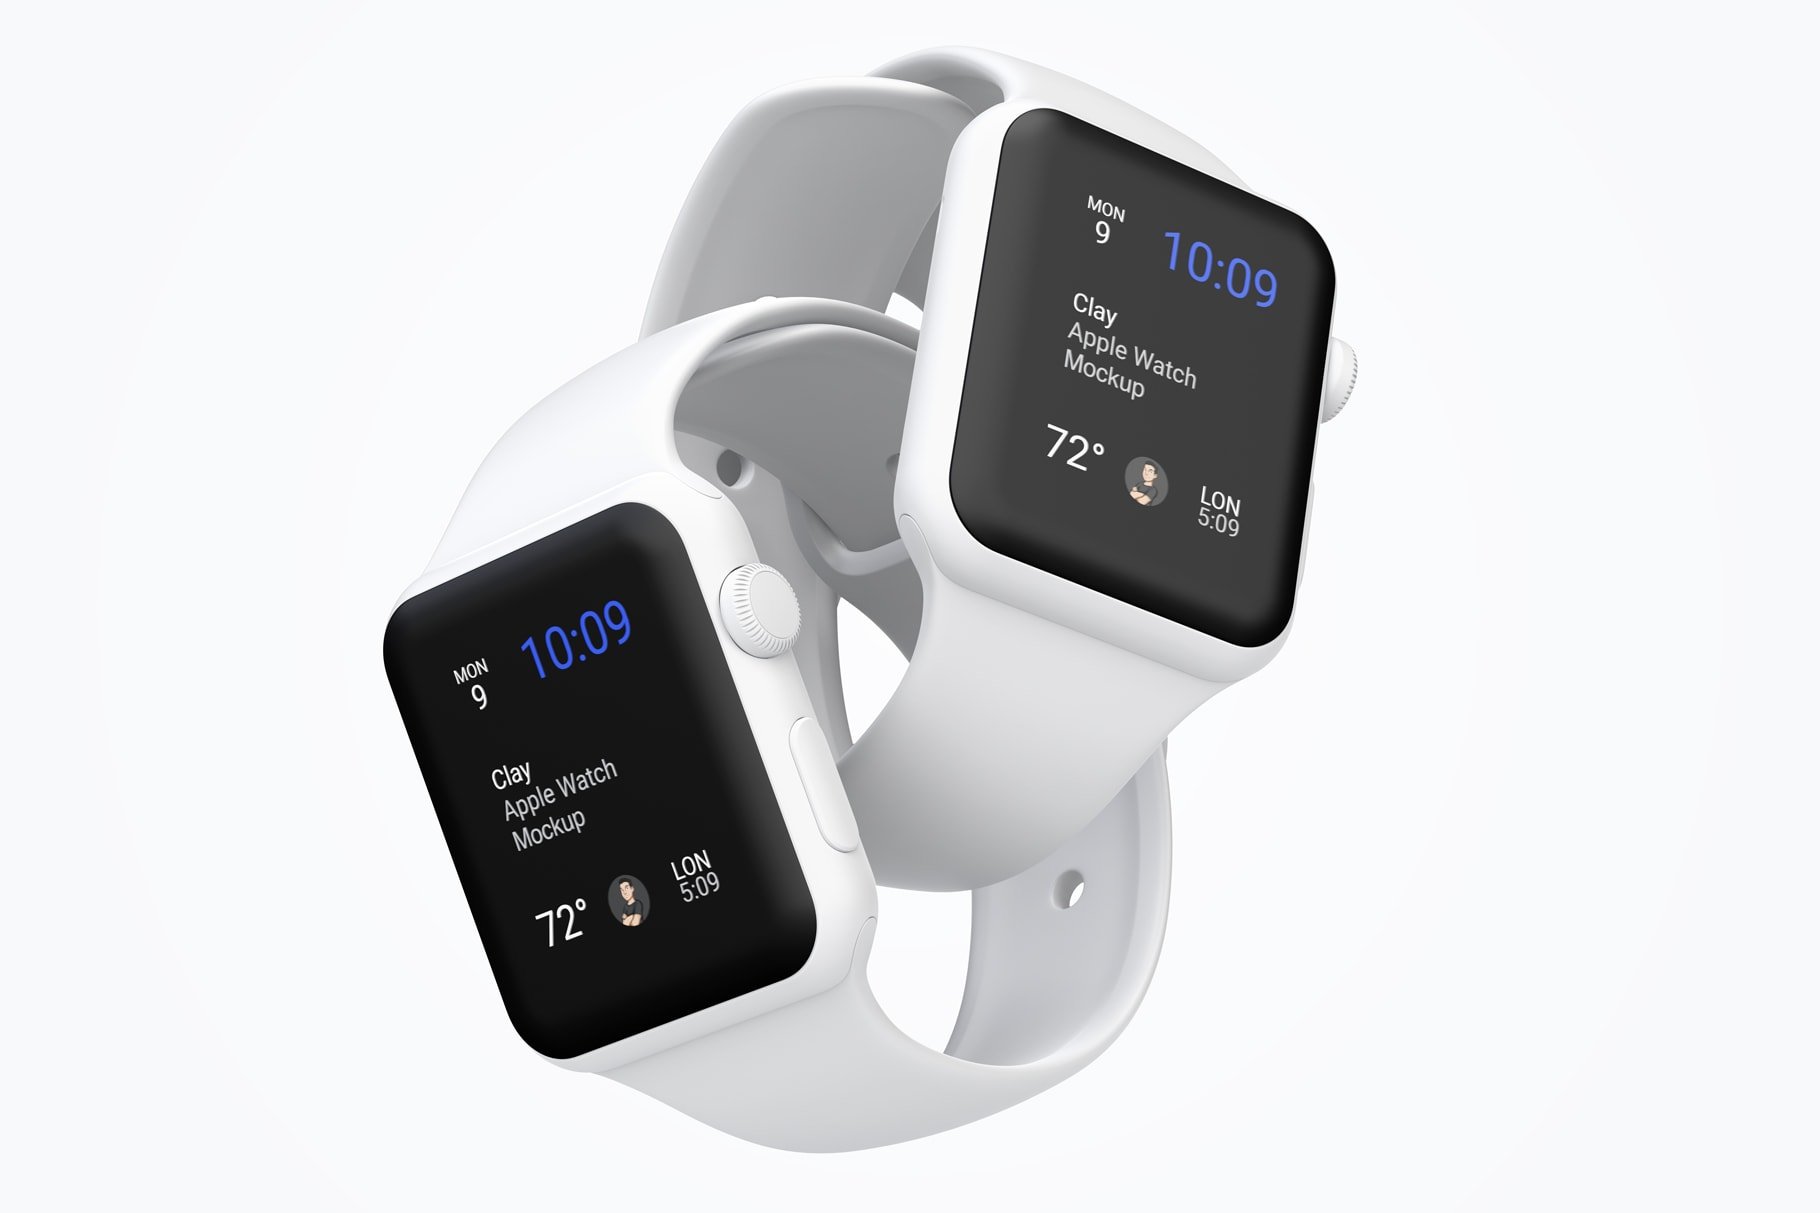 Apple Watch Clay Mockup by Anchal on Dribbble